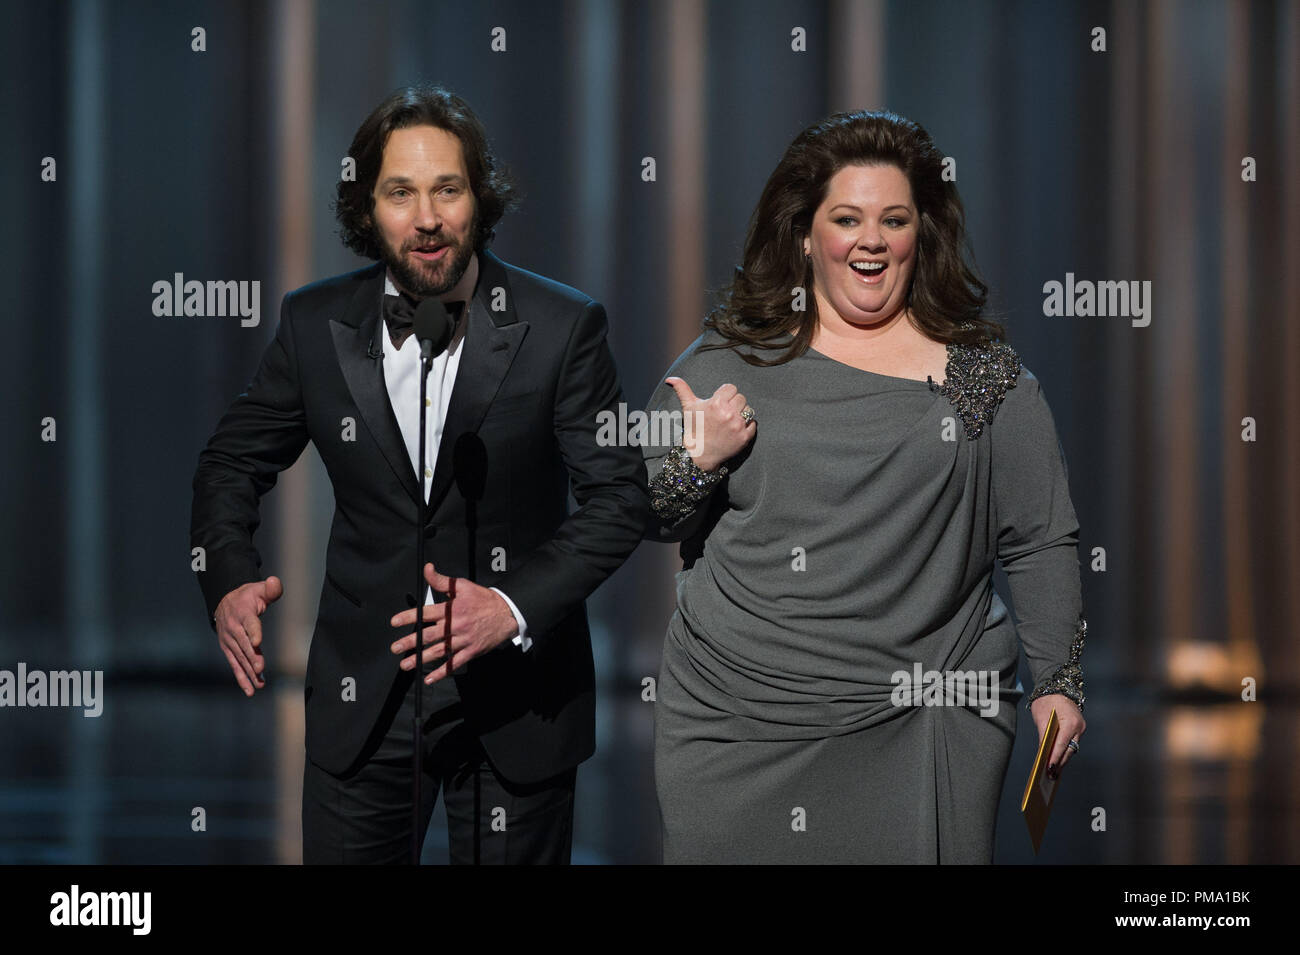 Melissa McCarthy and Paul Rudd present during the live ABC Telecast of The Oscars® from the Dolby® Theatre in Hollywood, CA, Sunday, February 24, 2013. Stock Photo